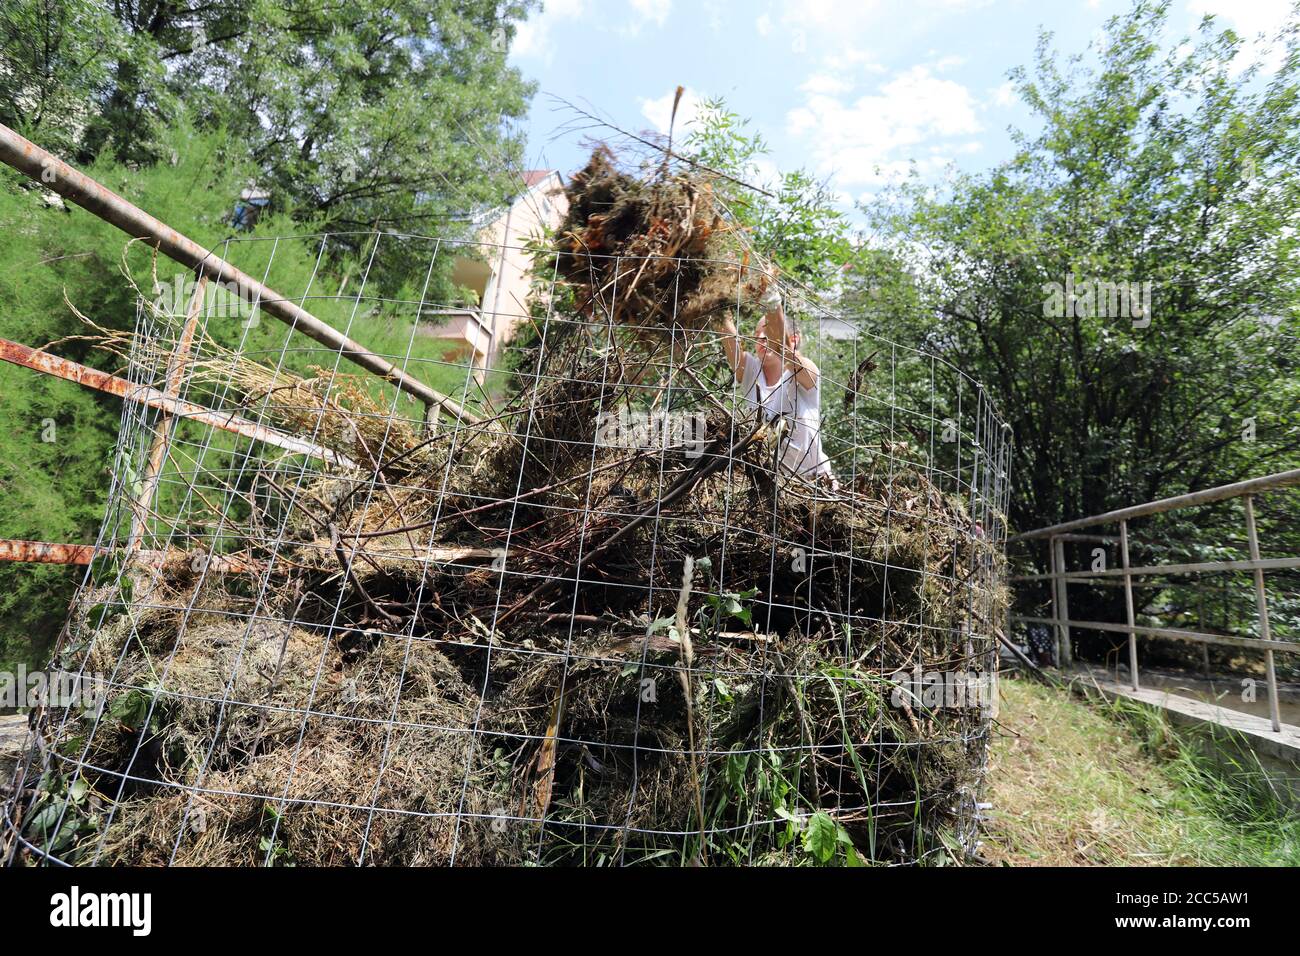 Organic composter. People are making bio composter bin in a yard. Stock Photo